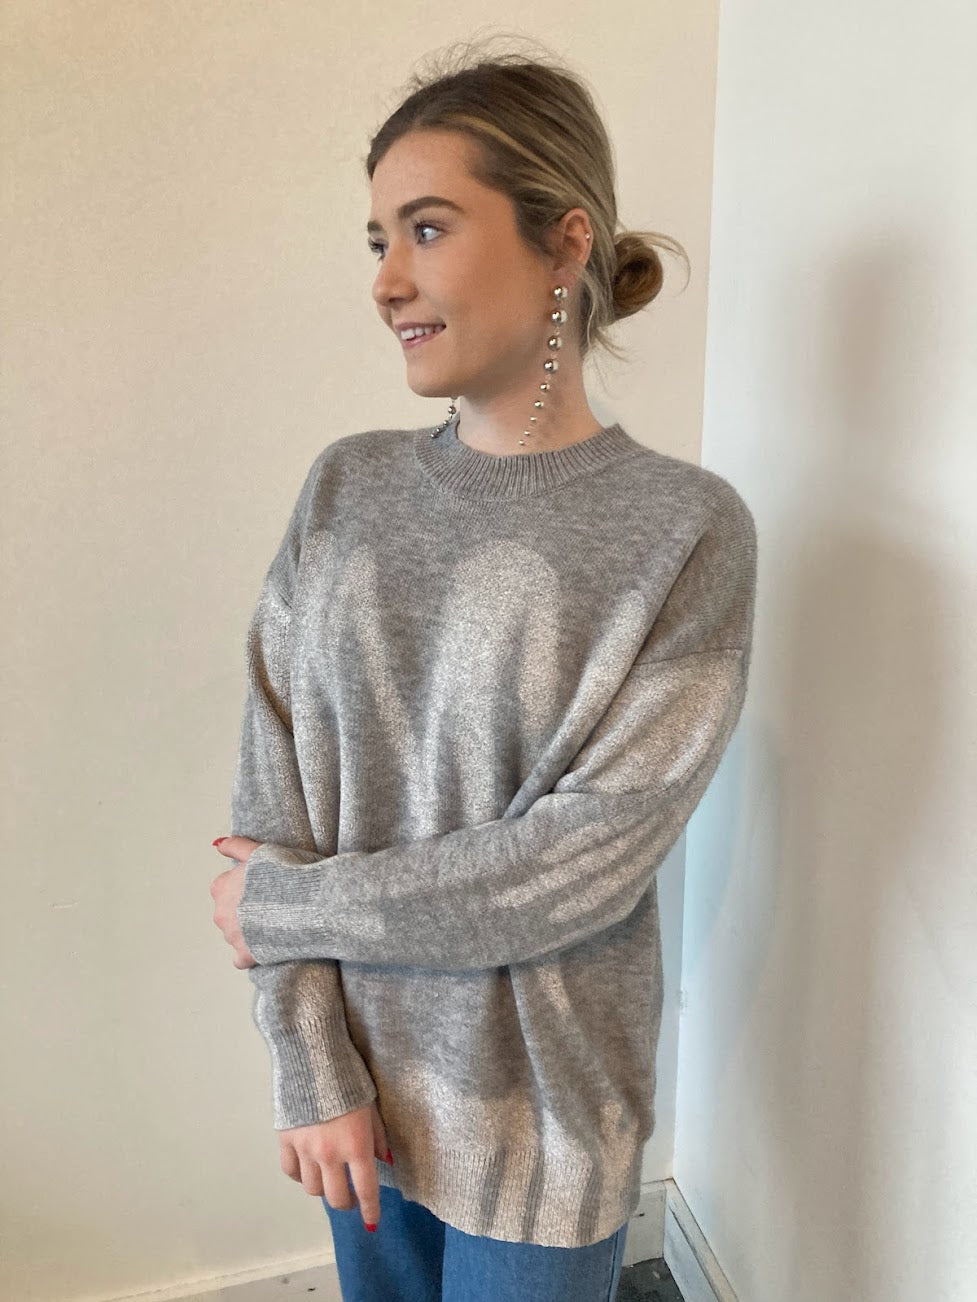 AFTERNOON DATE SWEATER